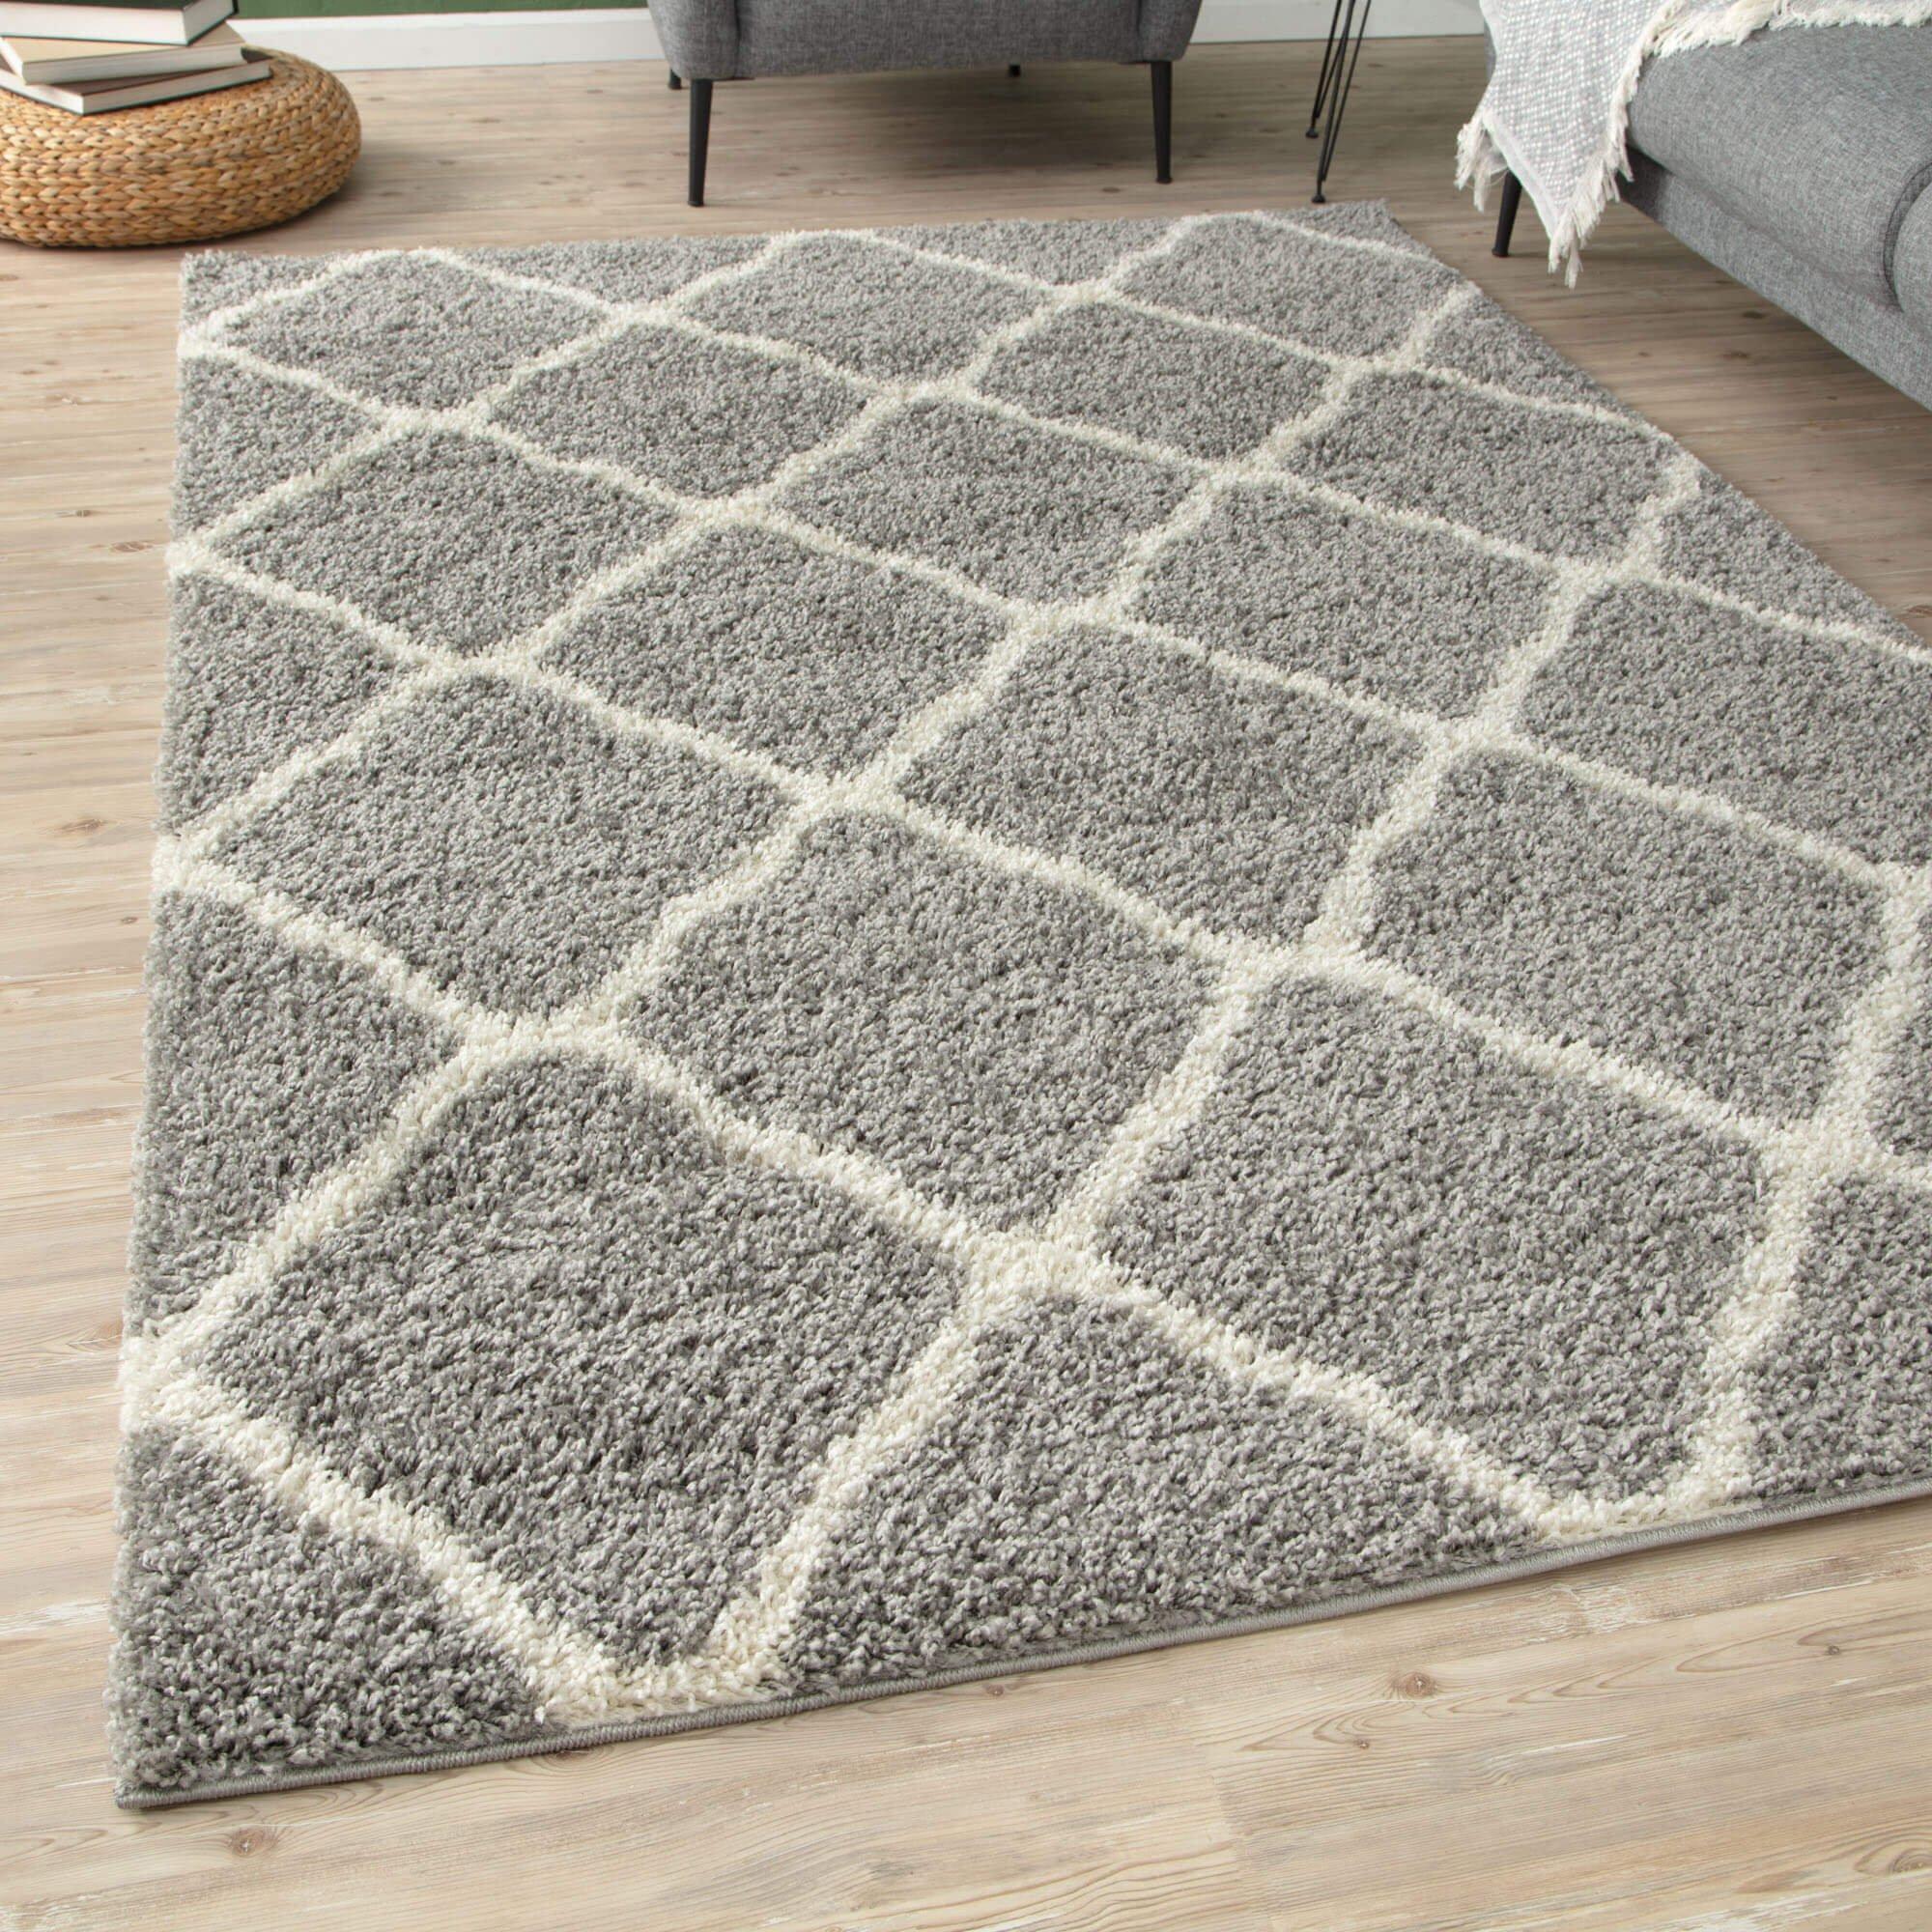 Myshaggy Collection Rugs Moroccan Design in Grey - 385 GI